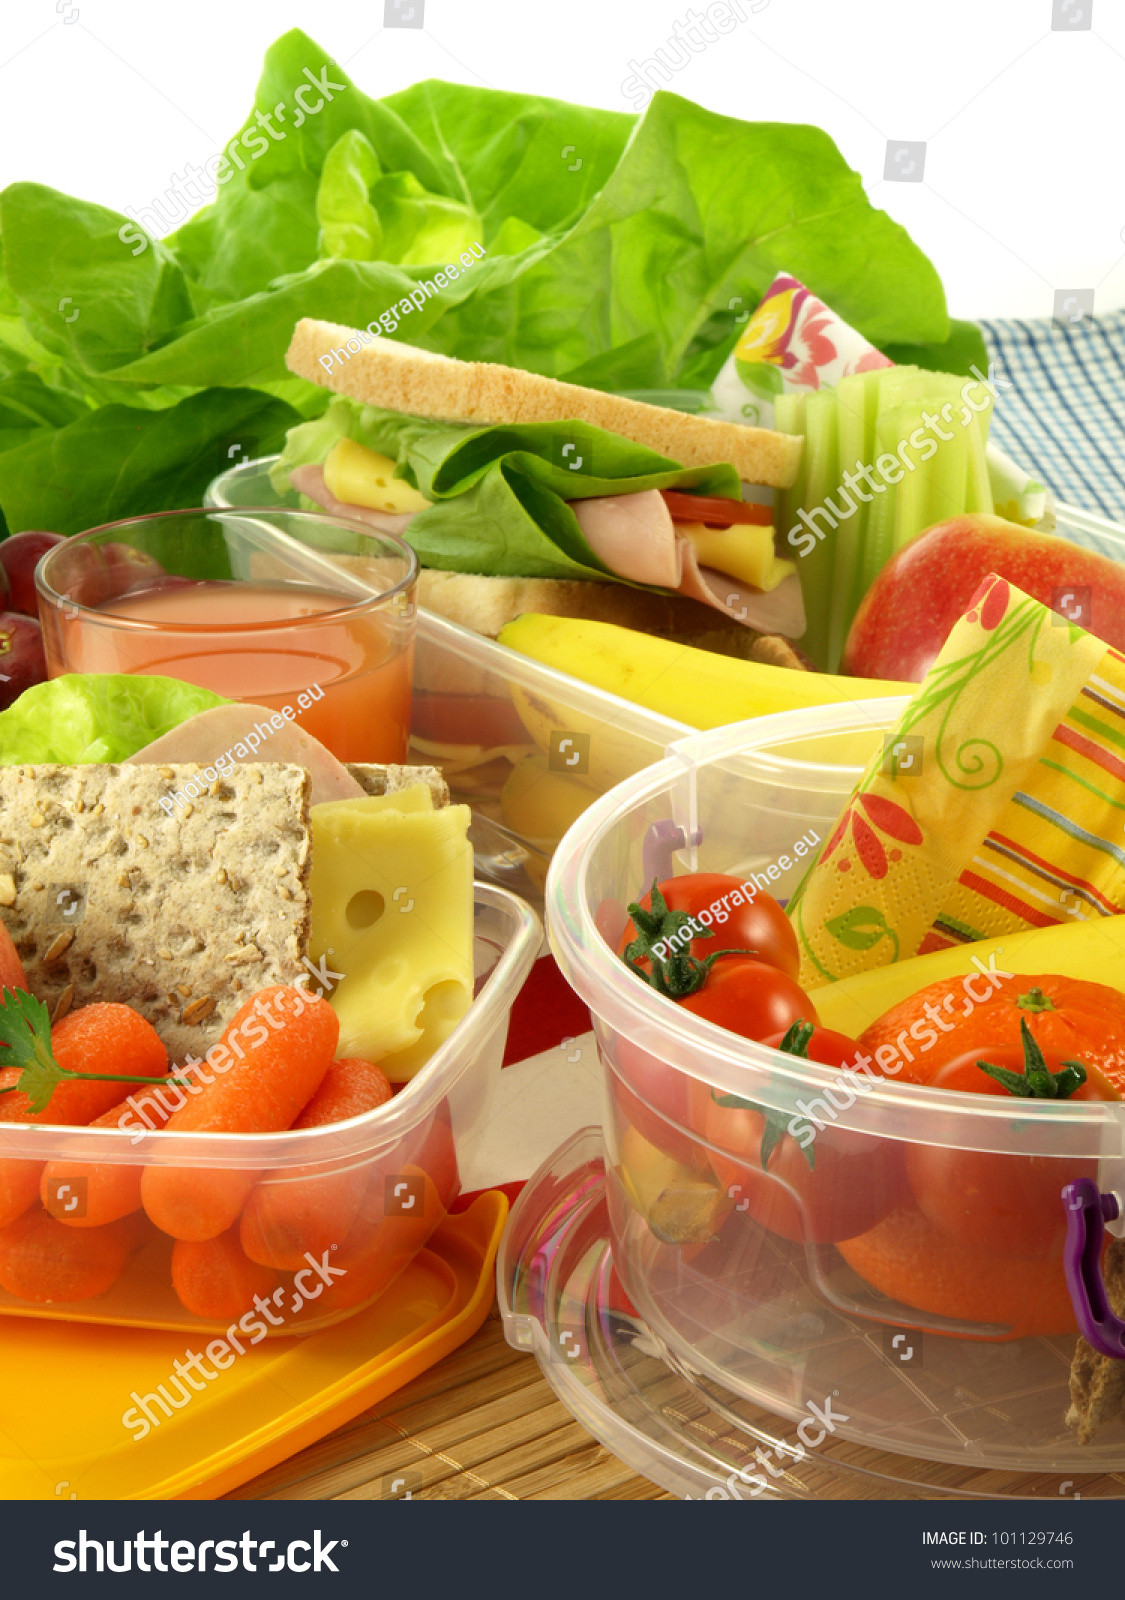 Small Healthy Lunches
 Healthy Lunch Prepared Small Plastic Containers Stock